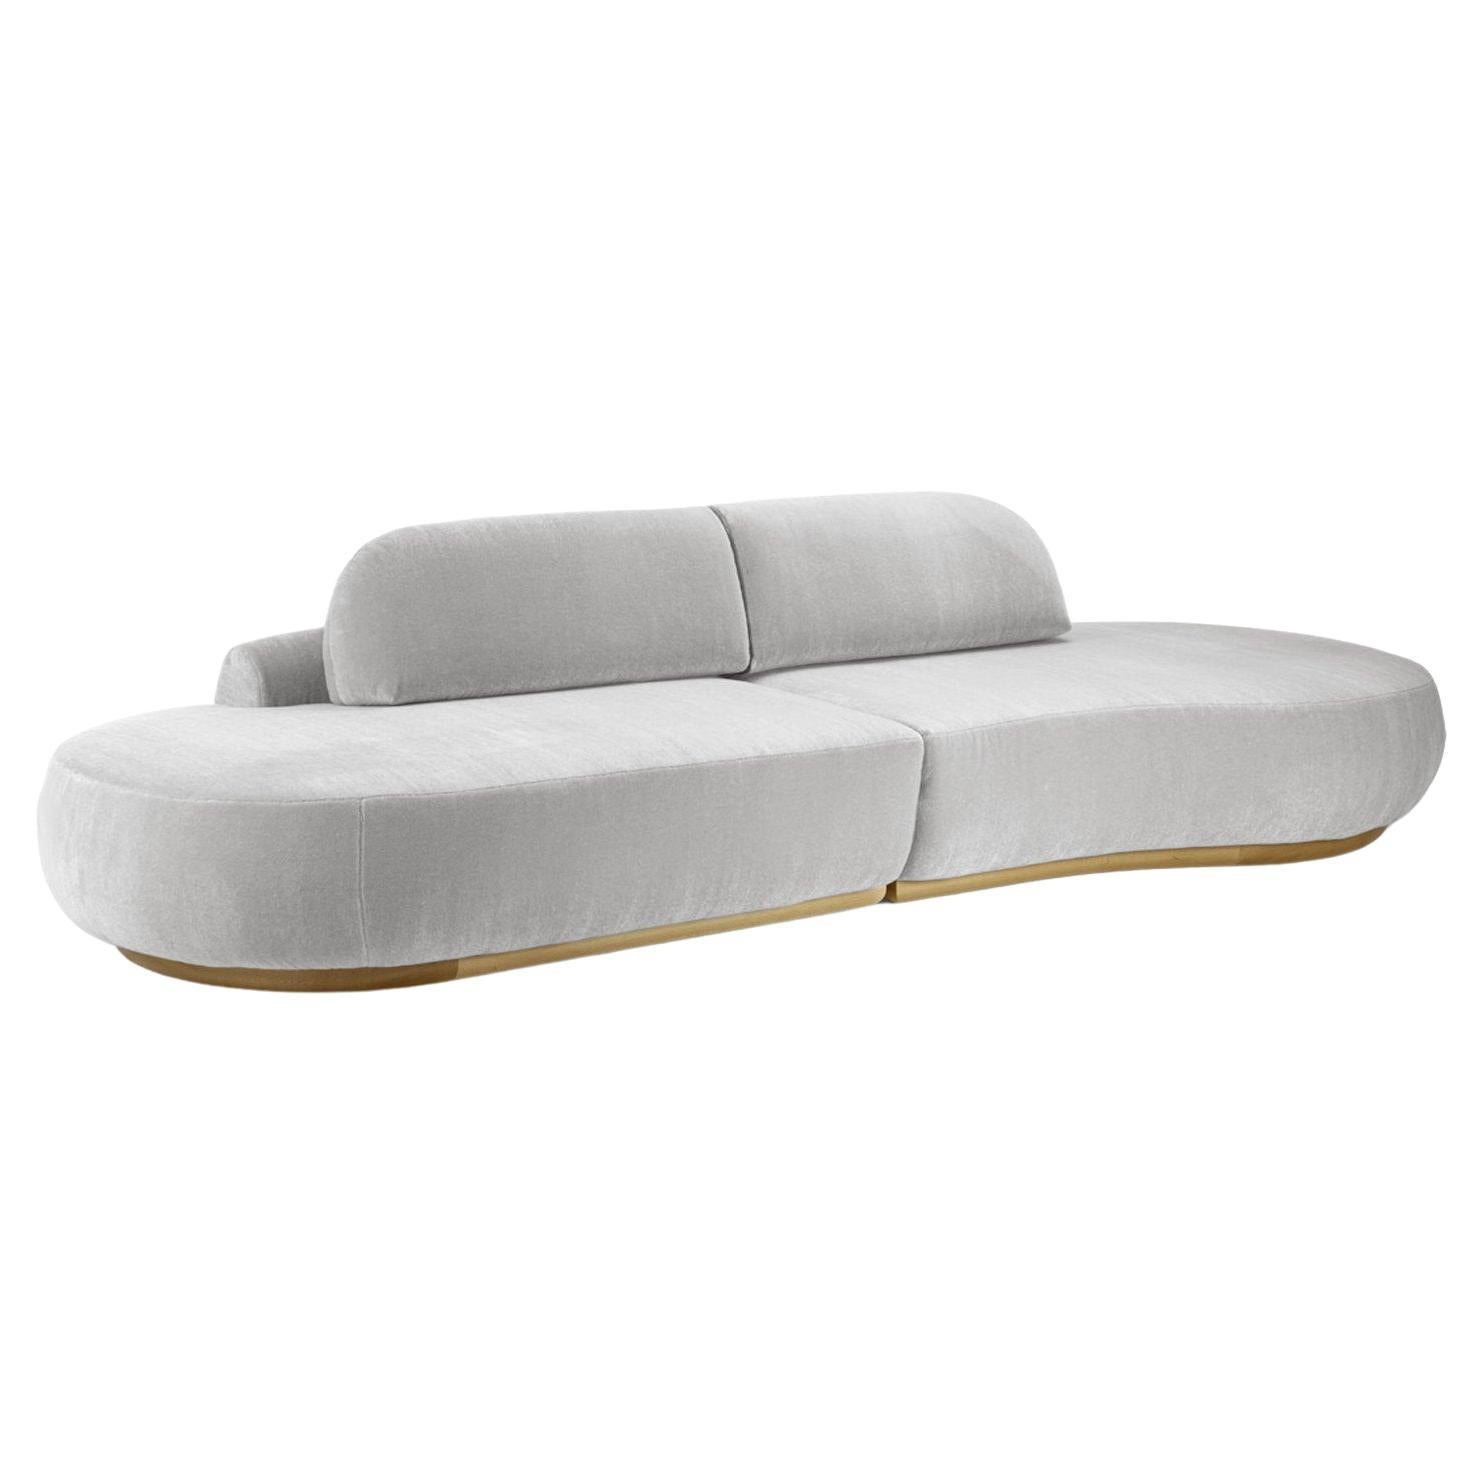 Naked Curved Sectional Sofa, 2 Piece with Natural Oak and Aluminium